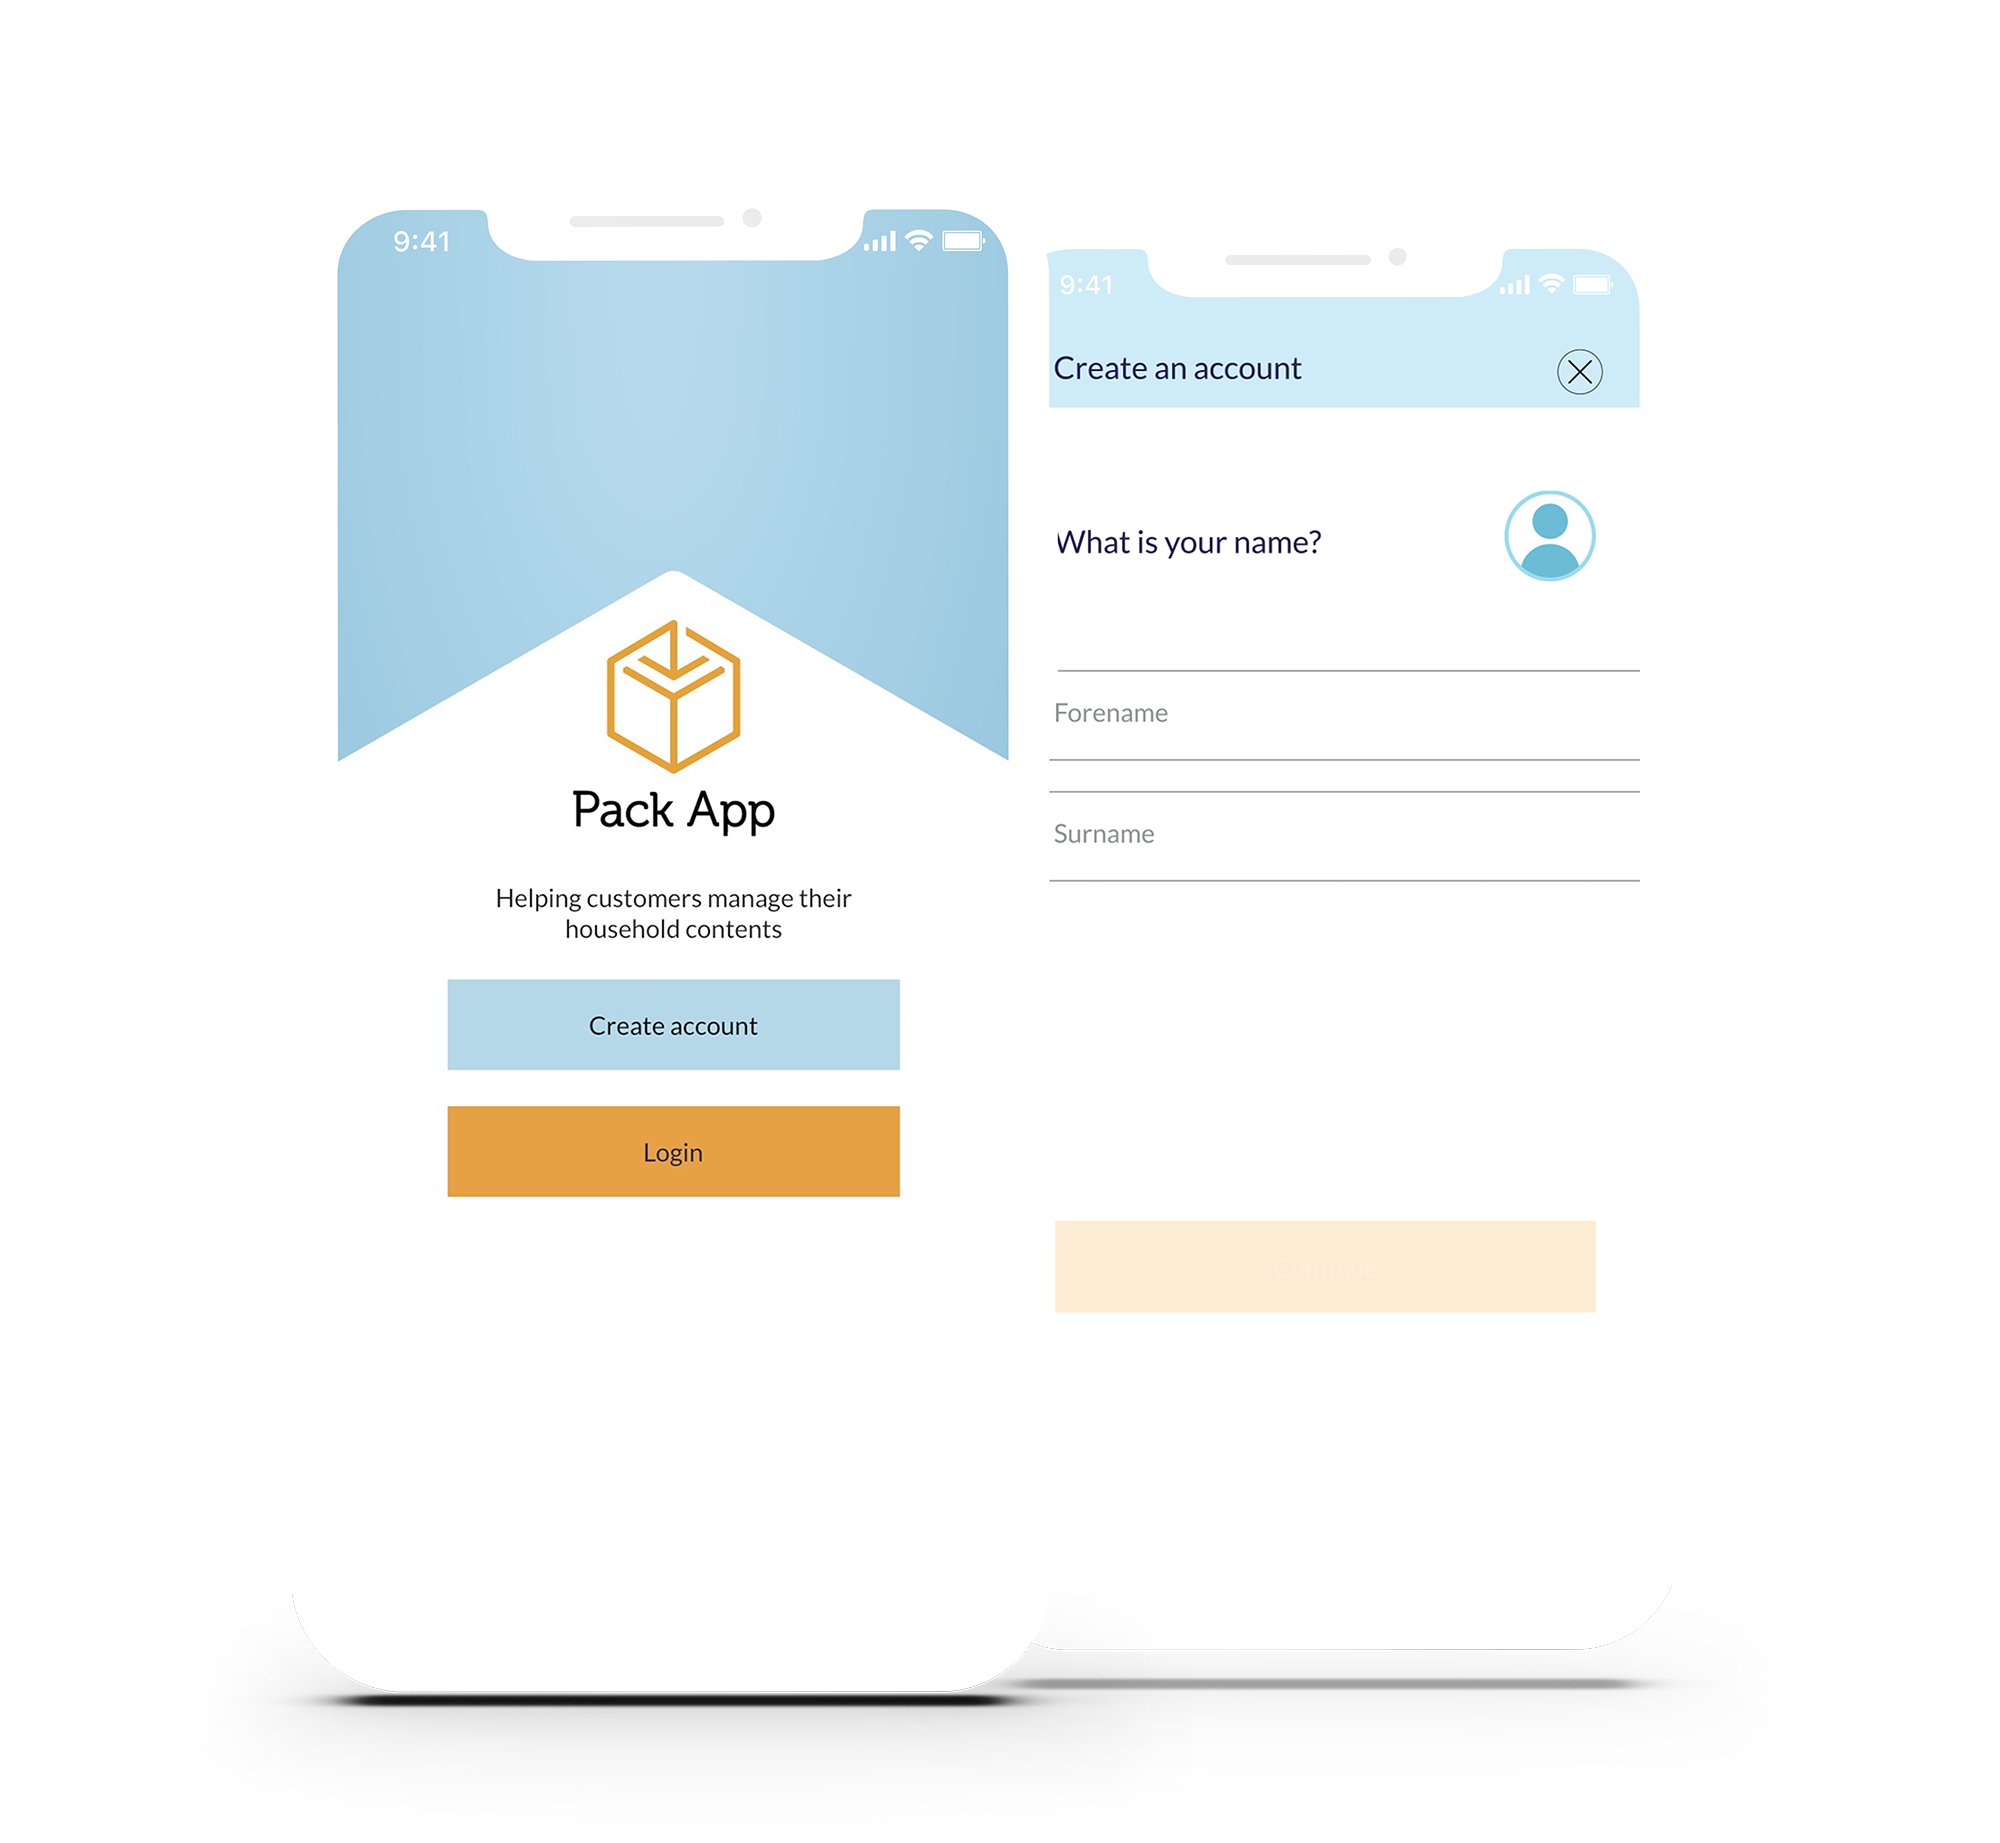 Register with Pack App